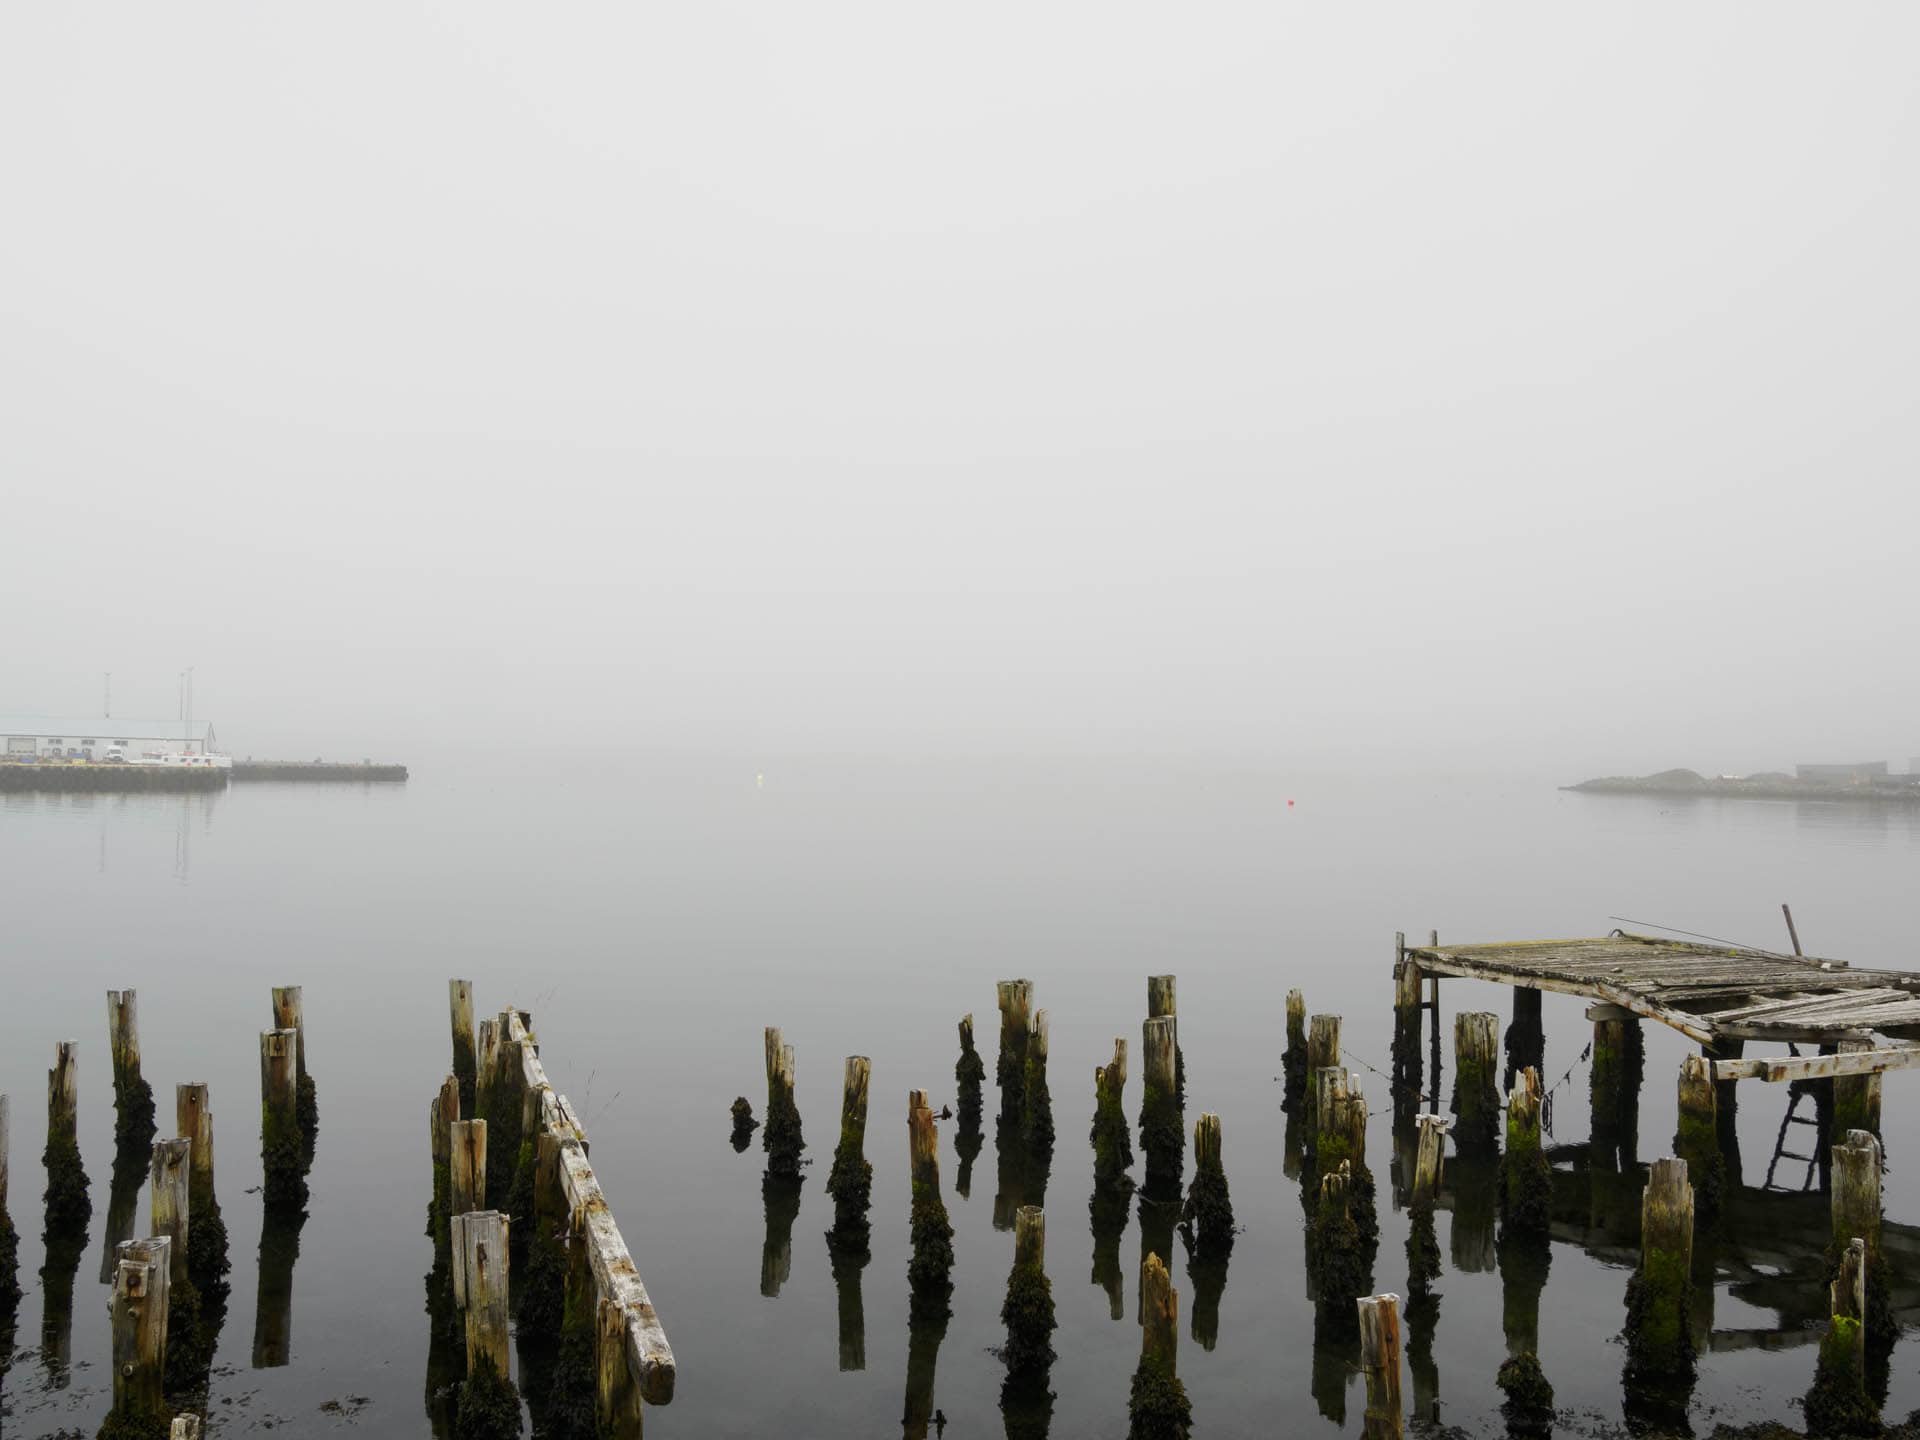 The silent harbour, “Fog in its dress whites at ease along the horizon” (from the poet,Charles Wright)